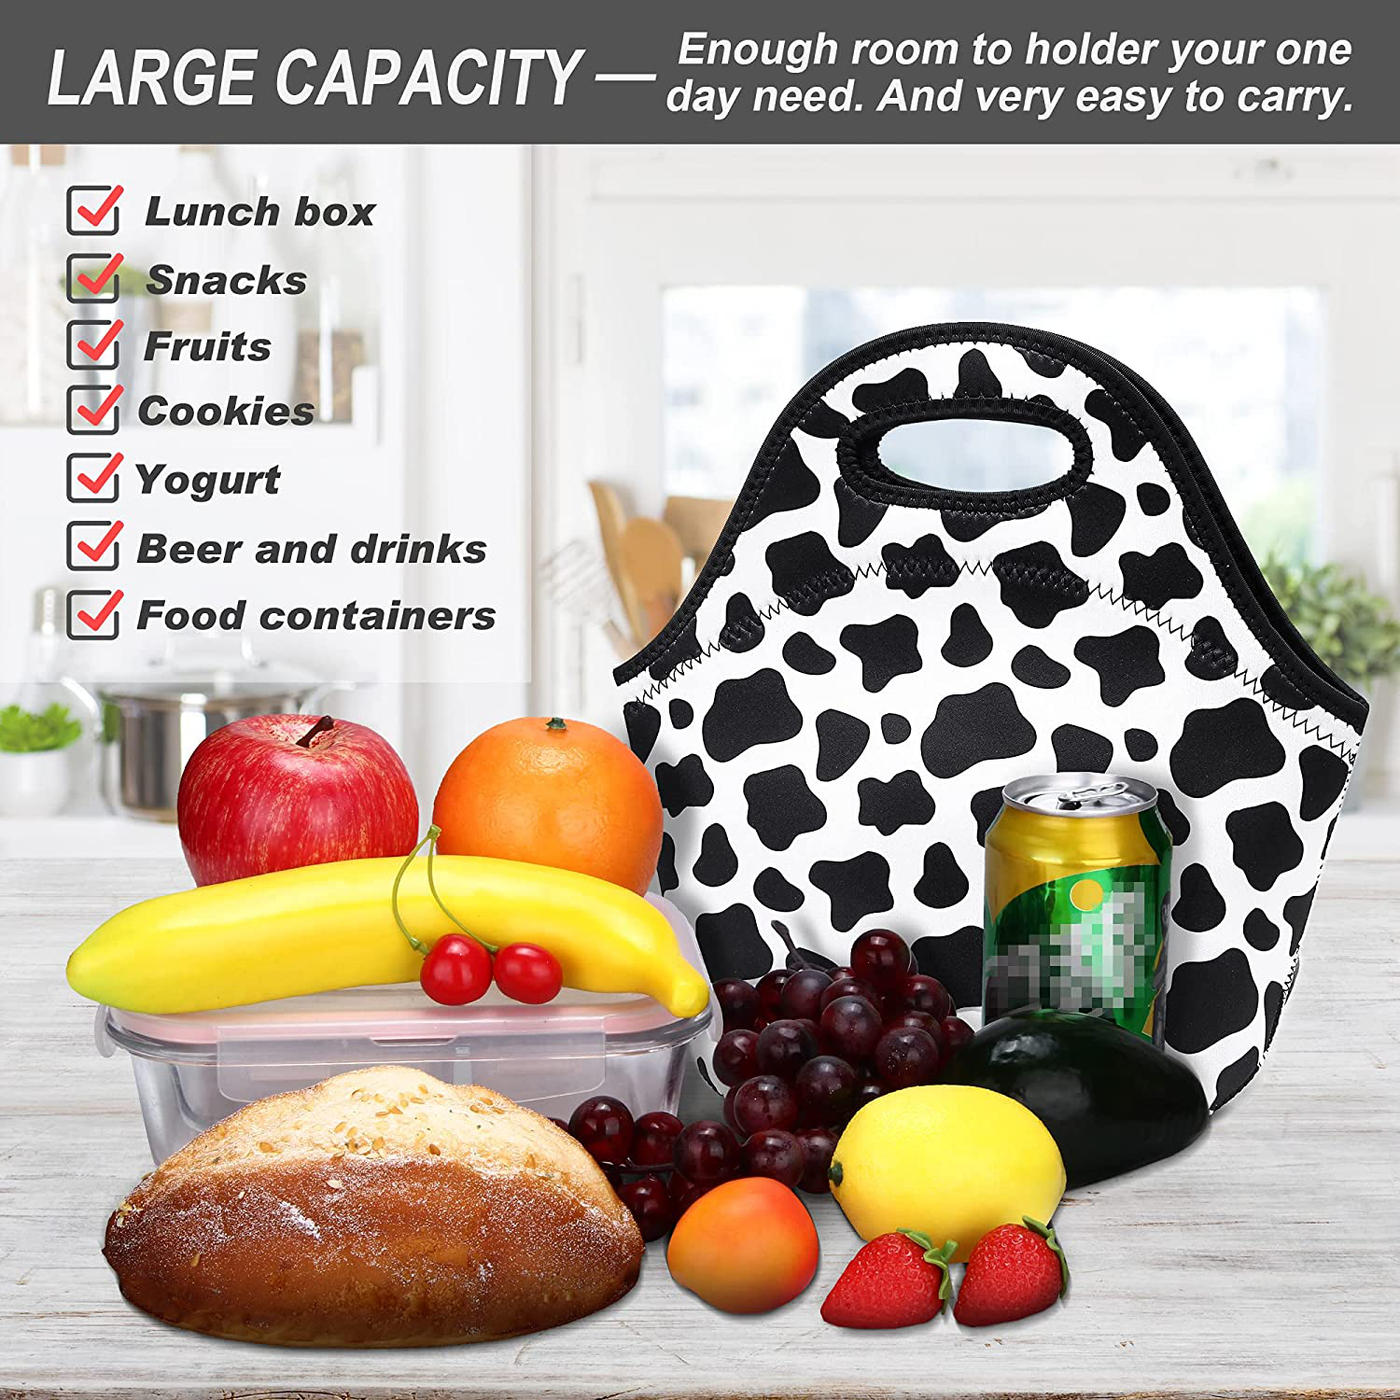 Neoprene Lunch Bags Insulated Lunch Tote Bags for Women Washable lunch container box for work picnic Lightweight Meal Prep Bags for Men Women (Big Colored Dots)